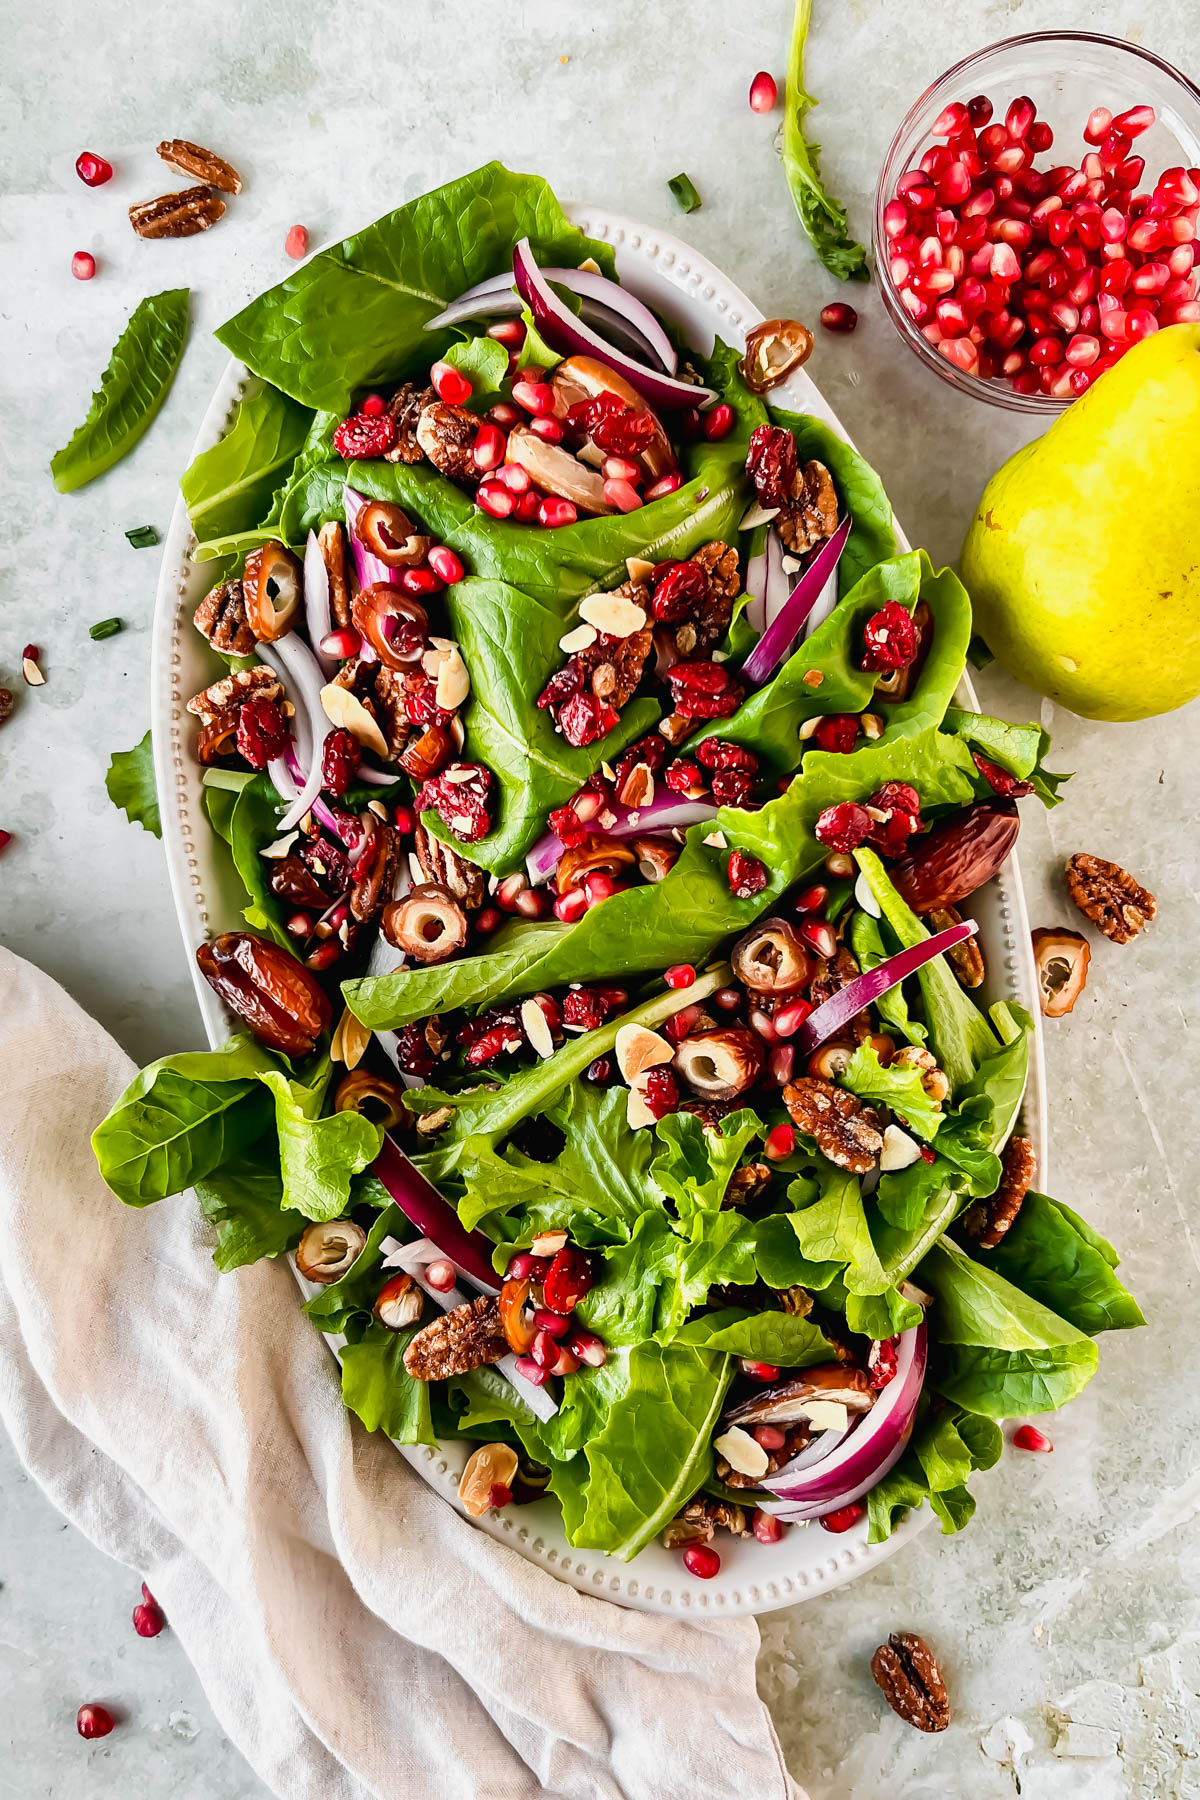 lettuce, sliced dates, pecans and red onion on white serving plate beside small bowl of pomegranate seeds and a pear.